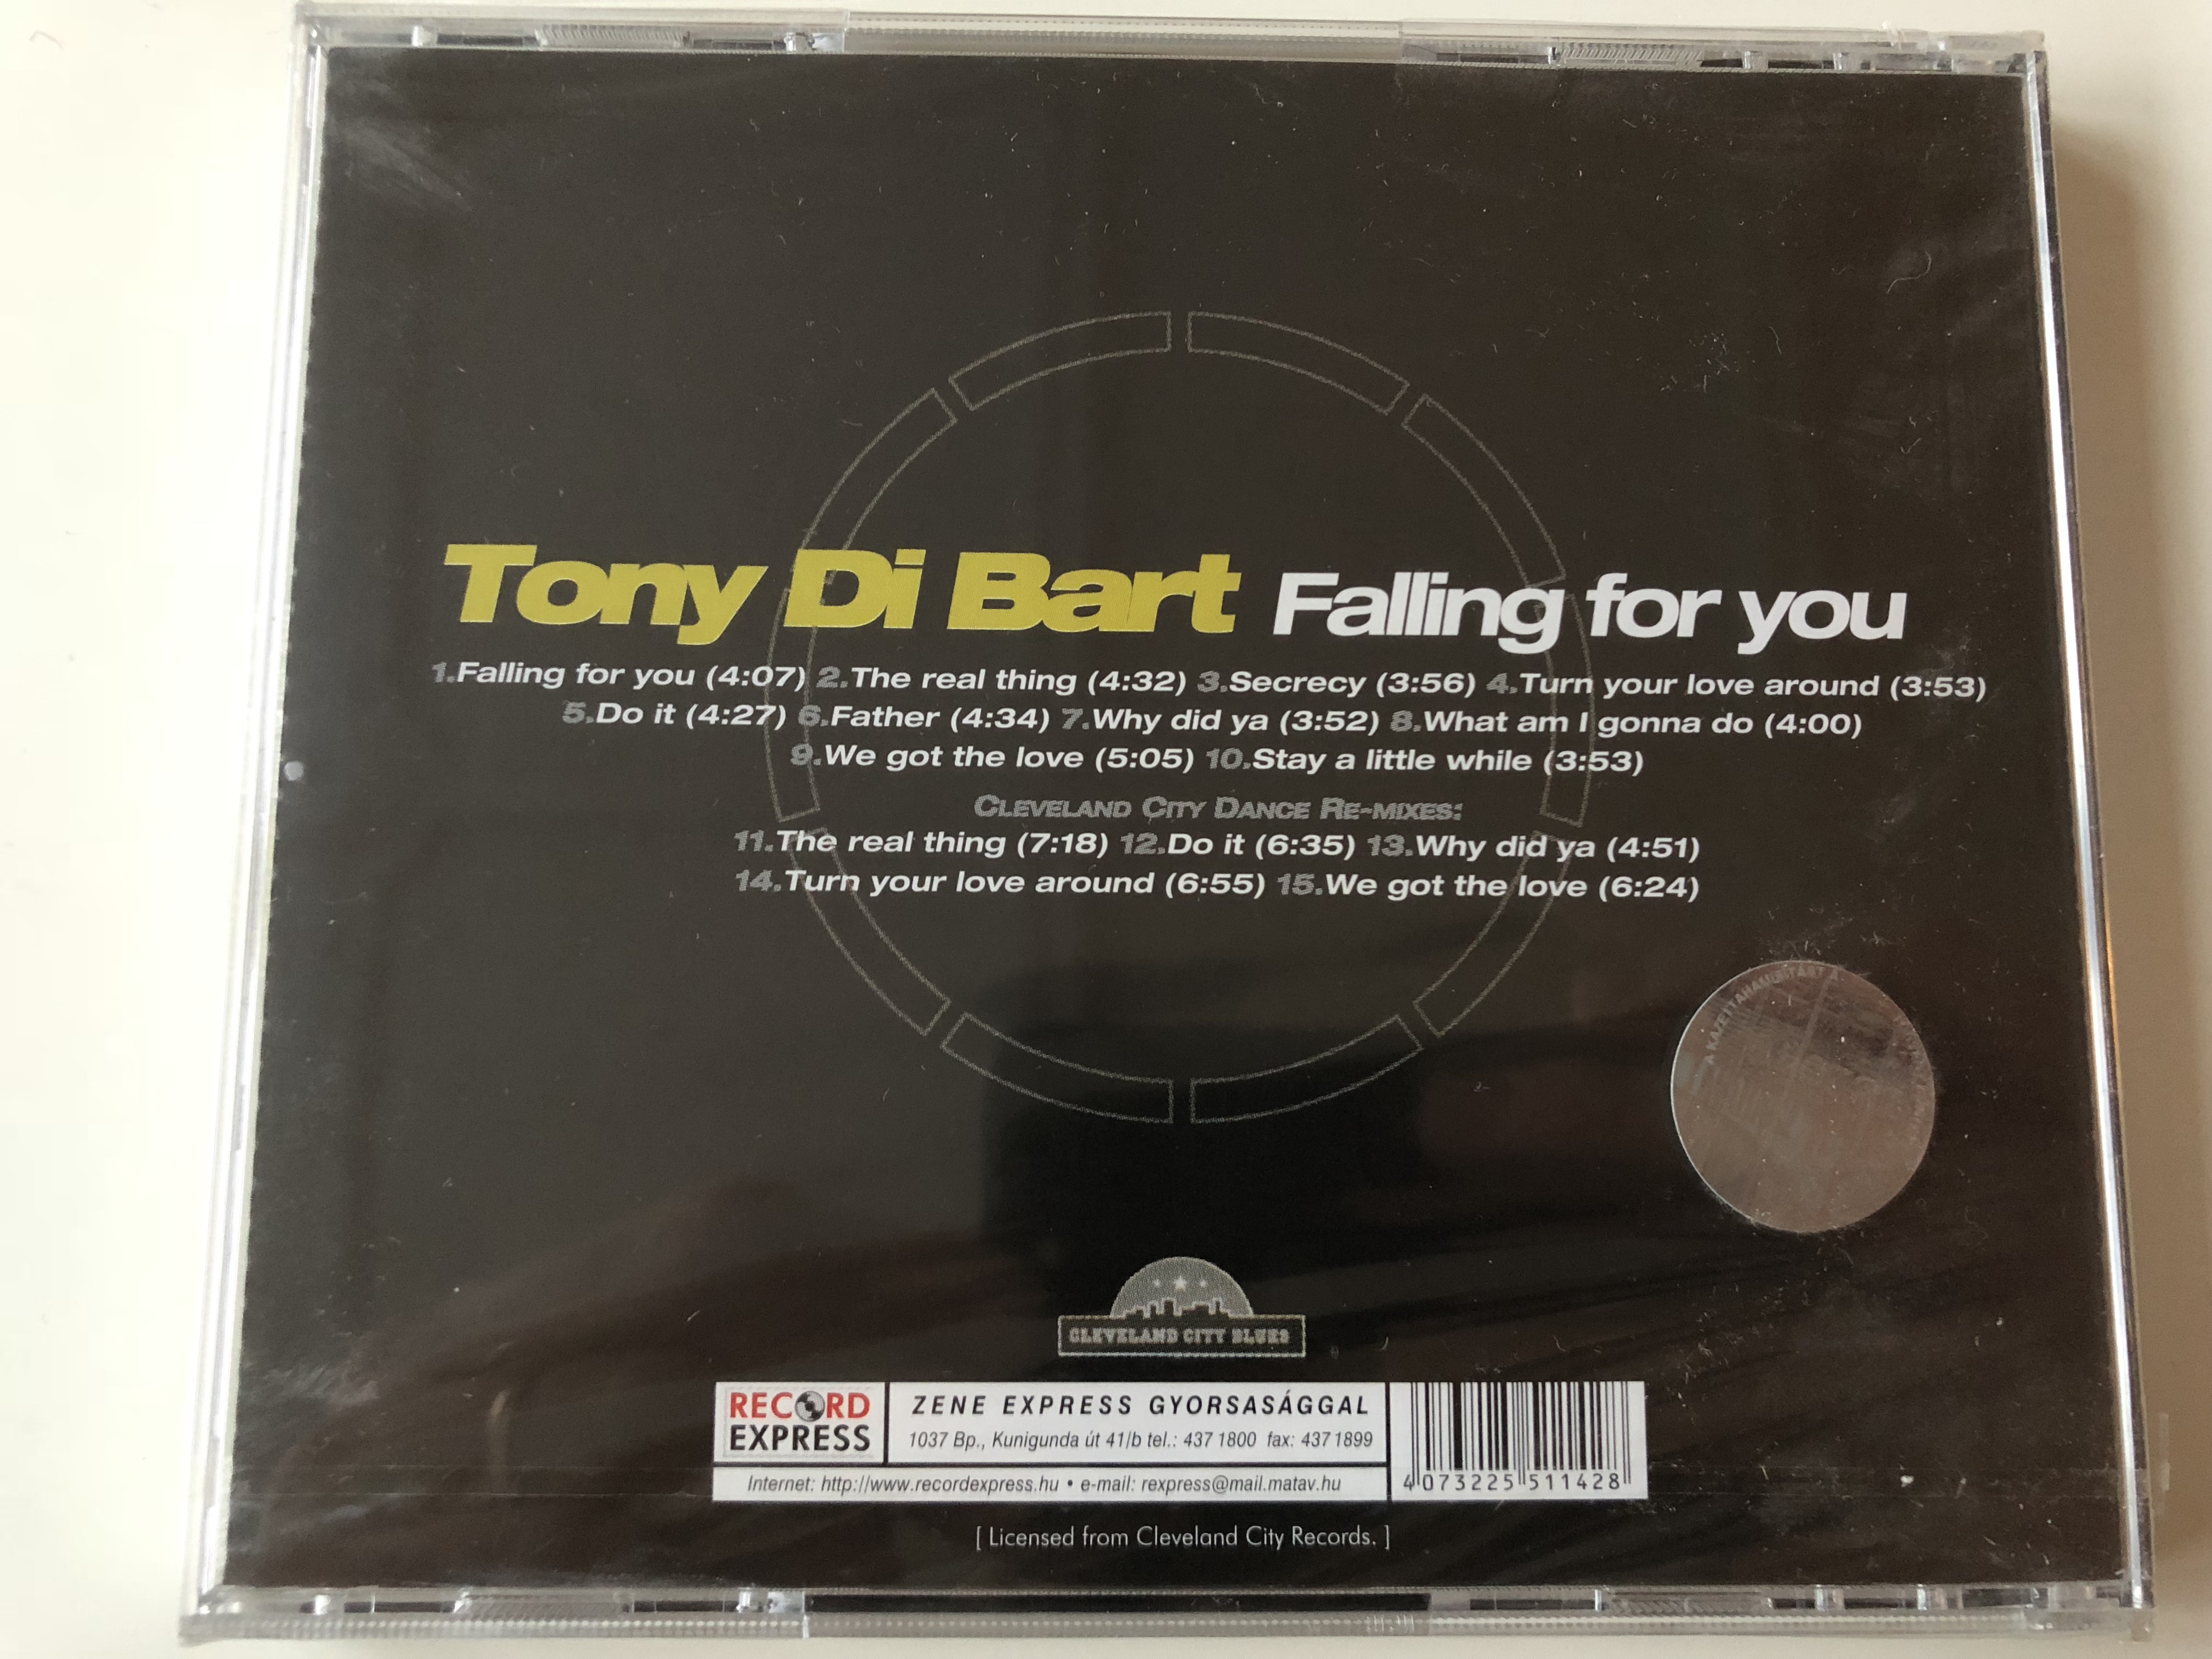 tony-di-bart-falling-for-you-audio-cd-1997-cleveland-city-records-record-express-2-.jpg